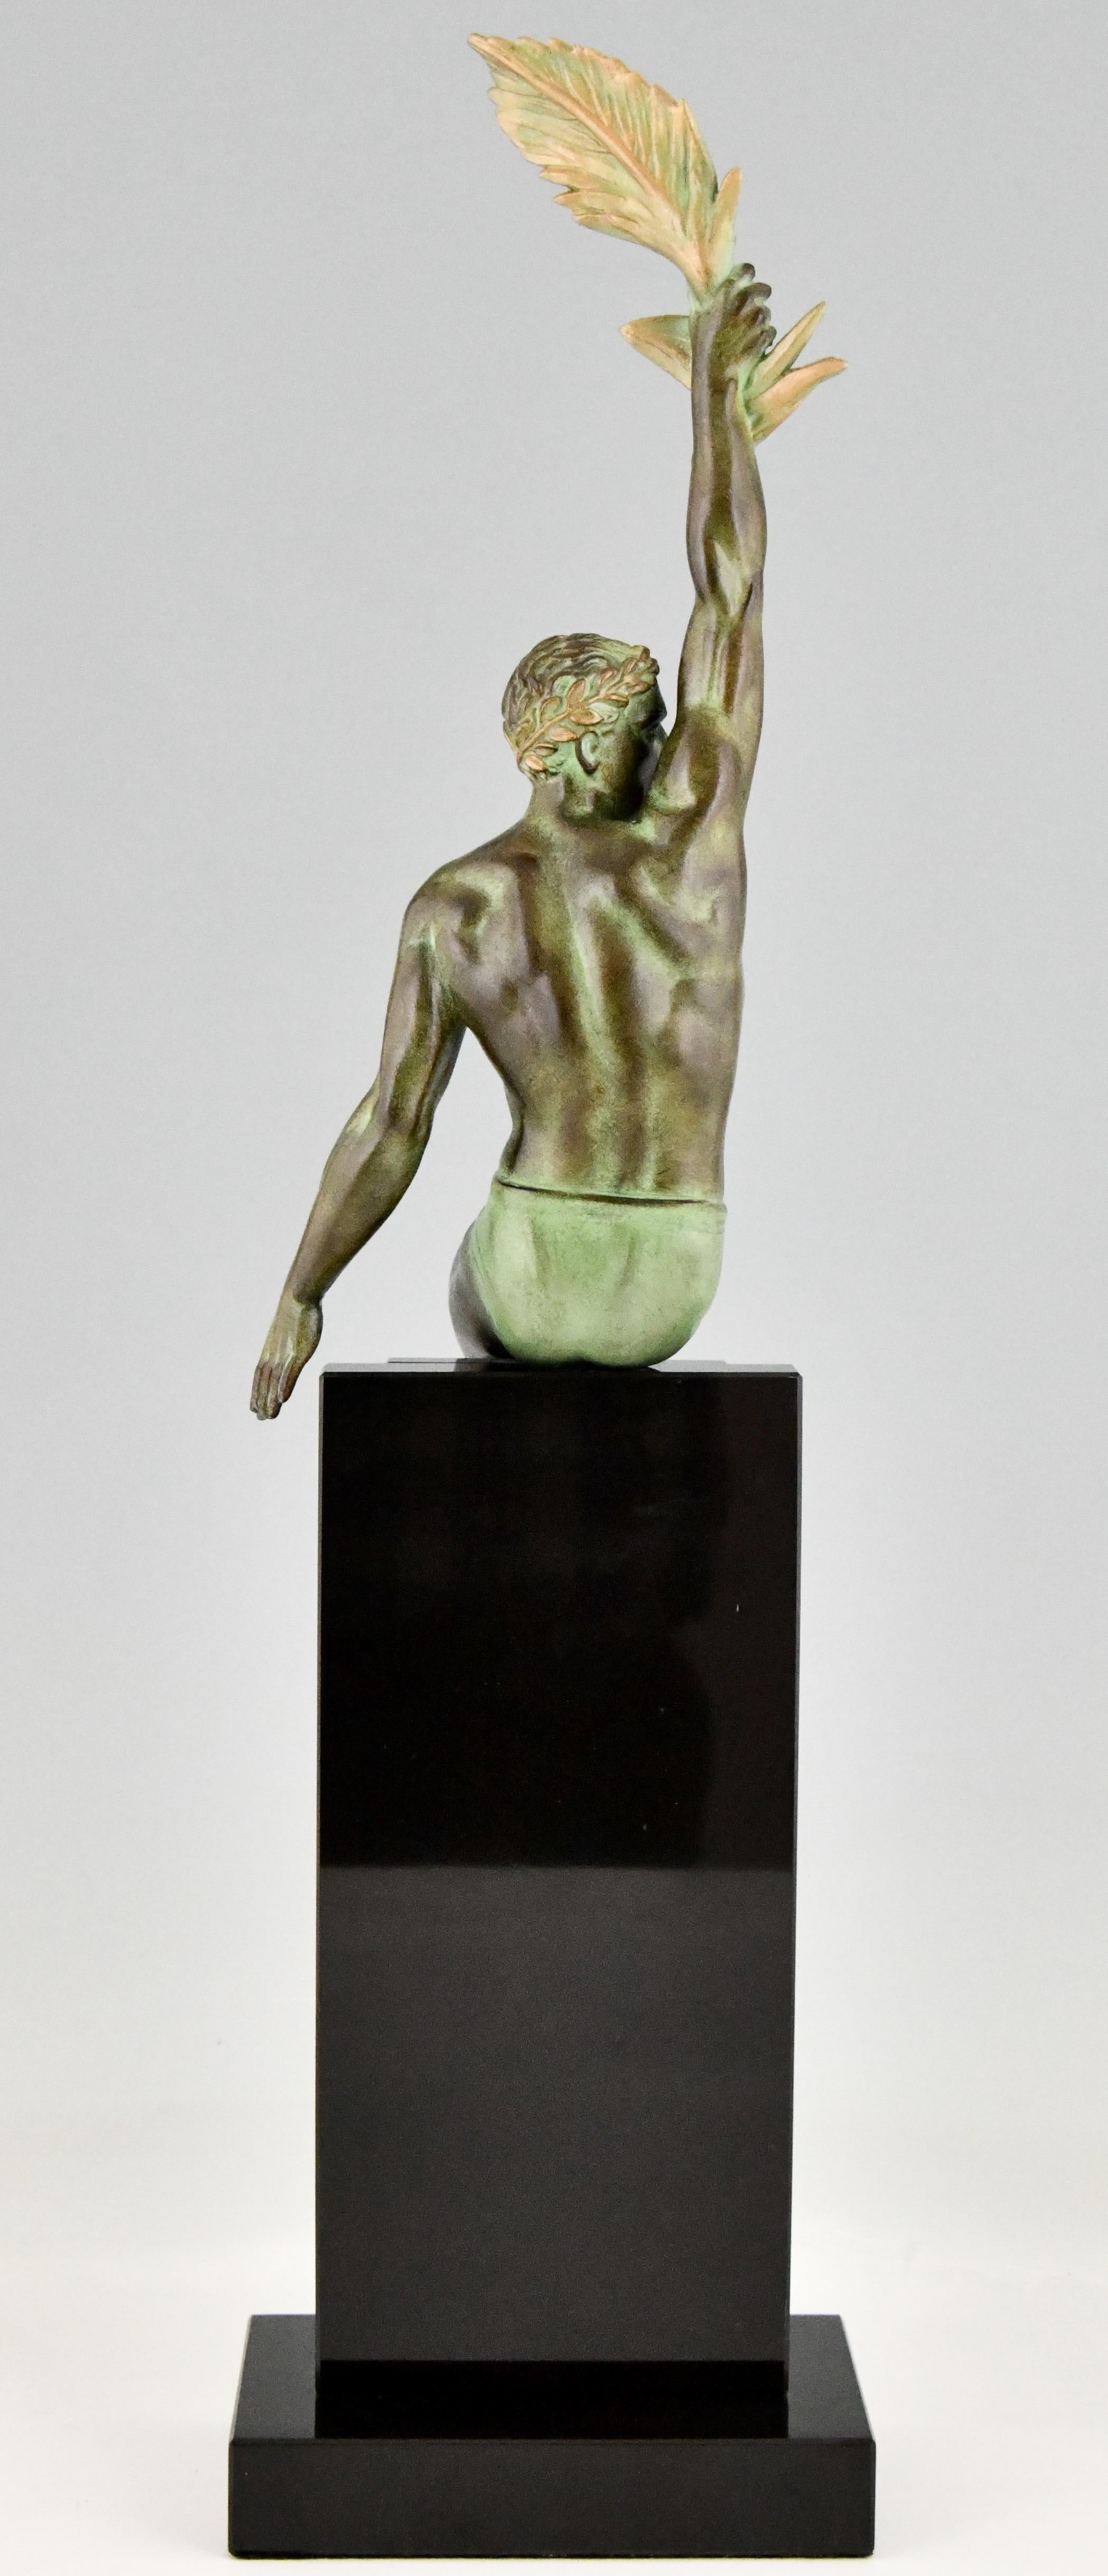 Contemporary Art Deco Style Sculpture Athlete with Palm Leaf by Max Le Verrier, Victory